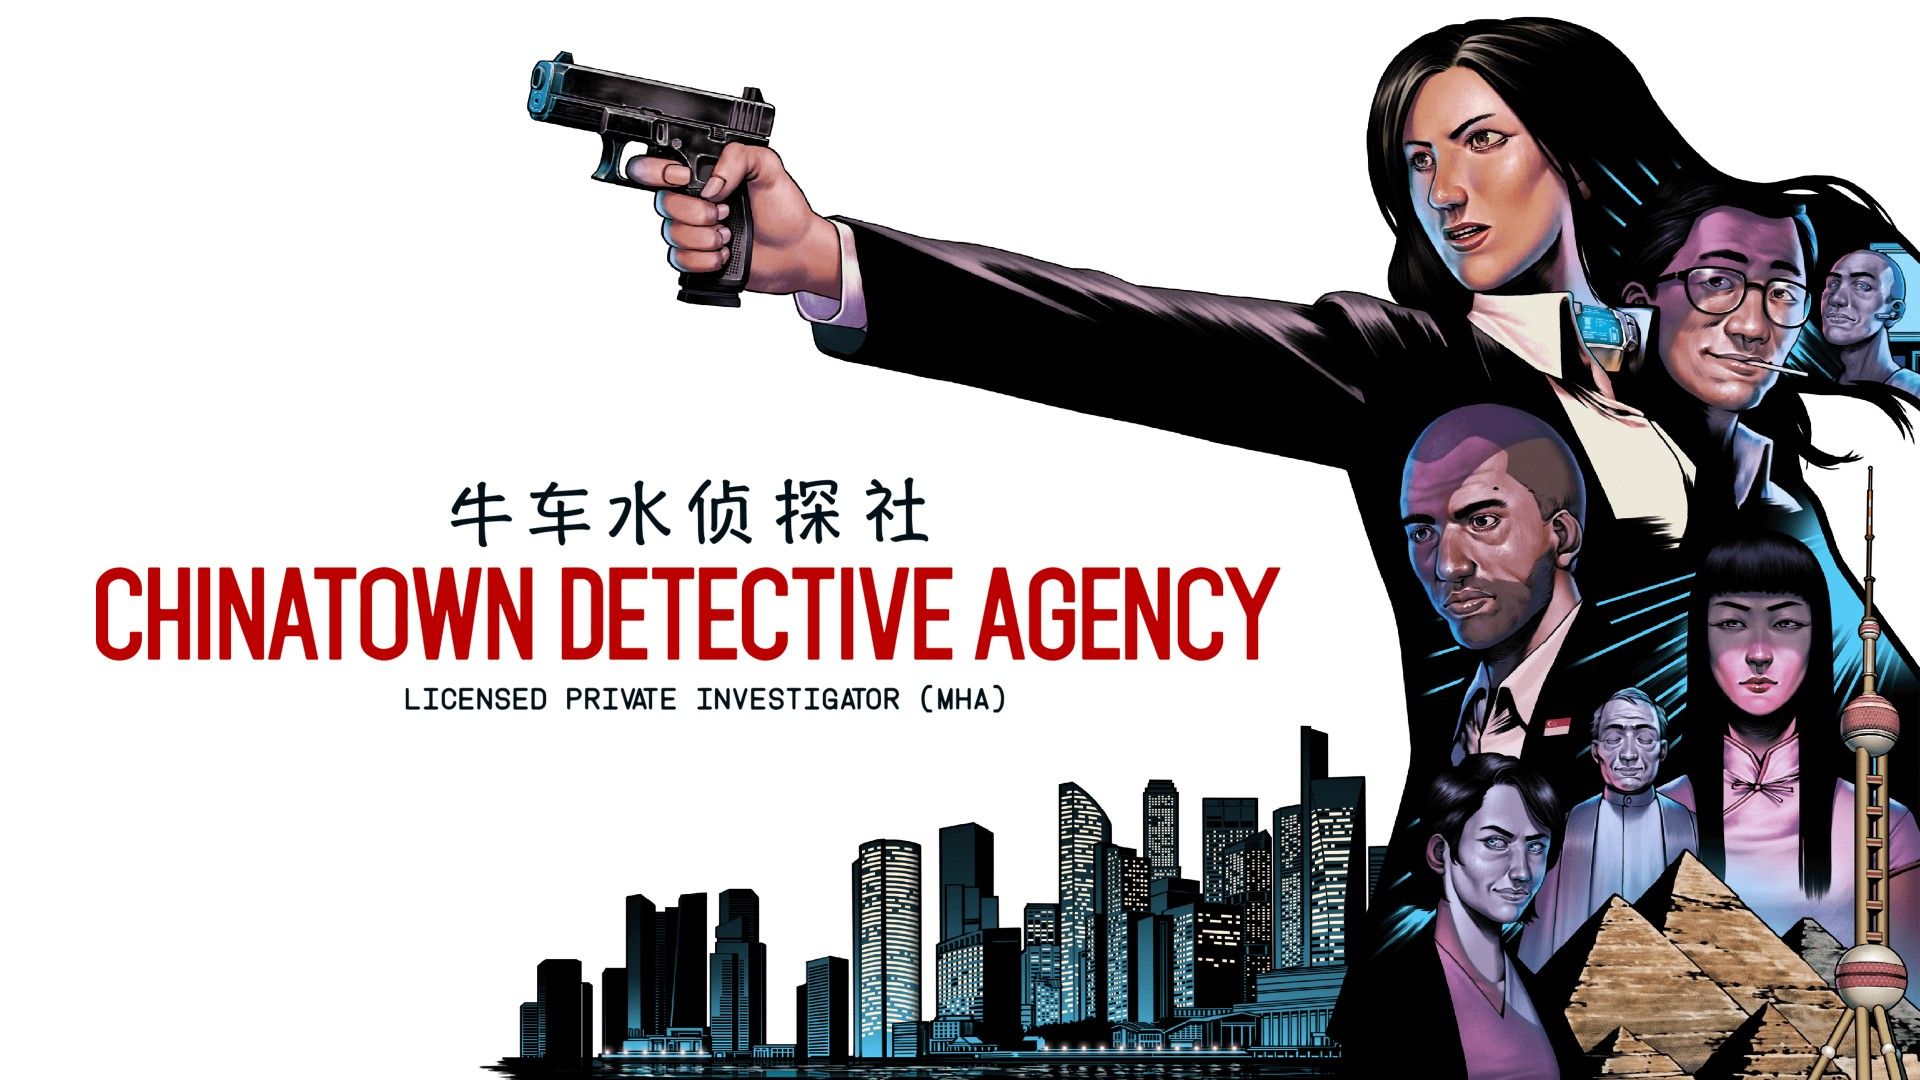 Chinatown Detective Agency promo art.